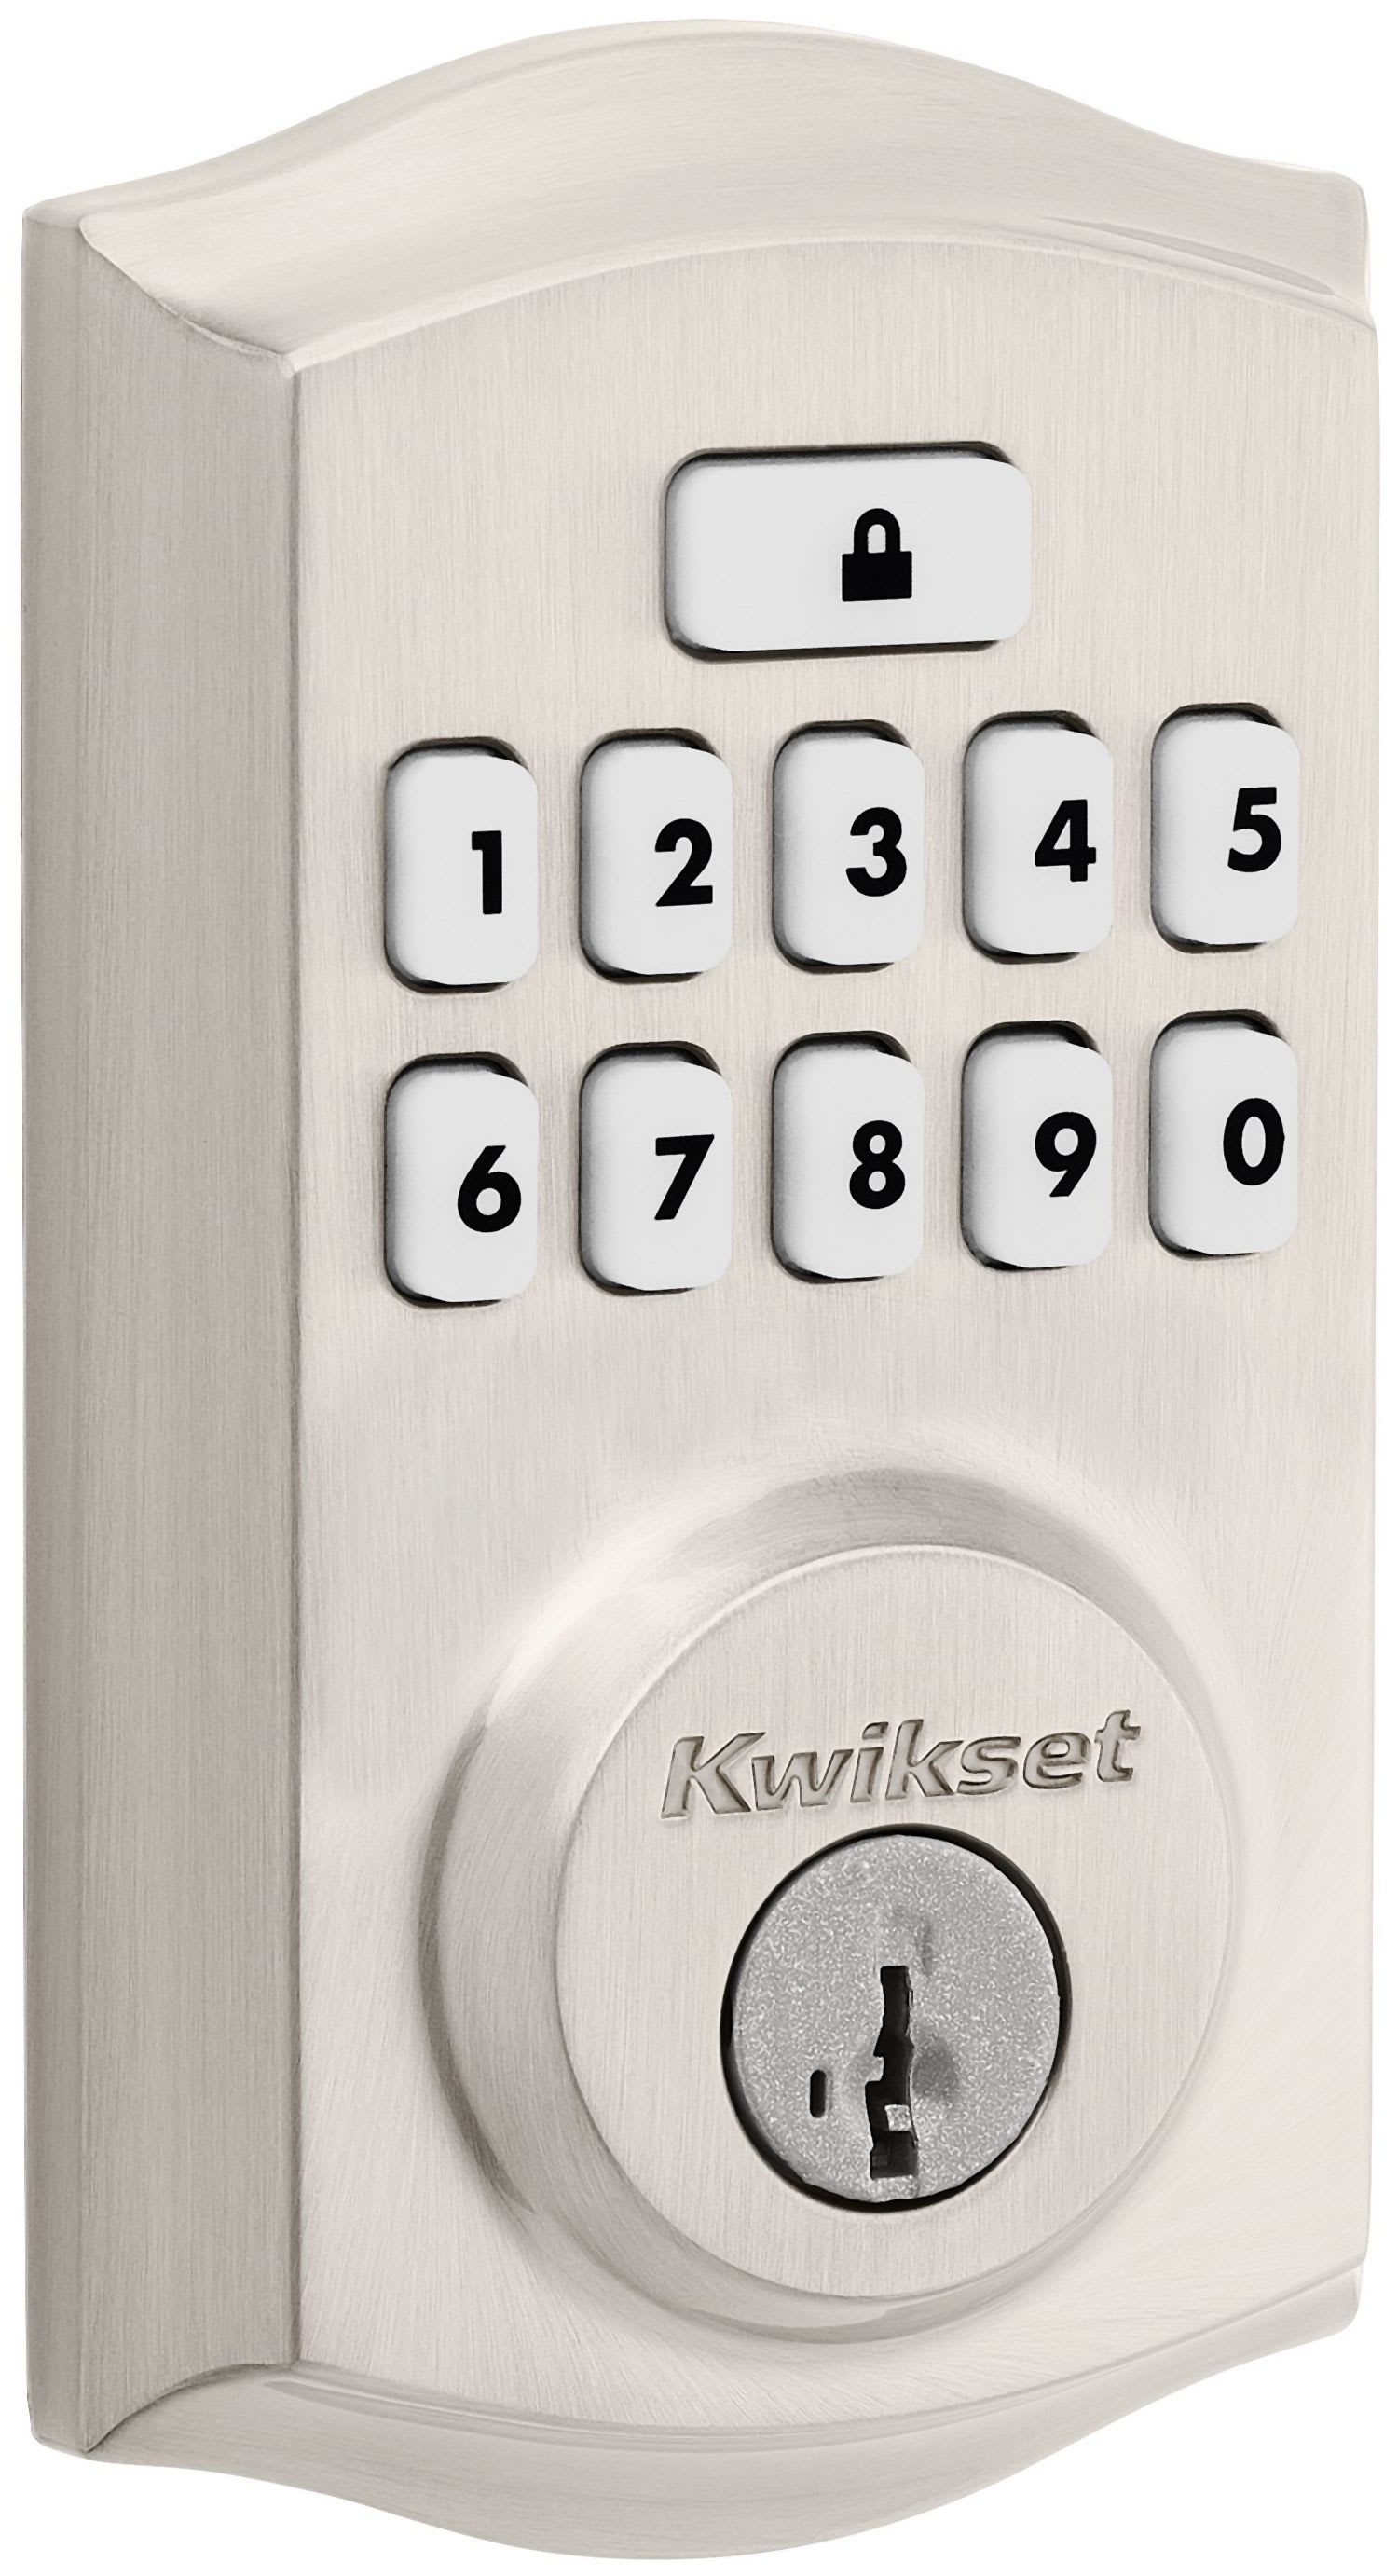 Kwikset 9260TRL-15S Satin Nickel SmartCode Deadbolts Touchpad Single  Cylinder Keyless Entry Deadbolt with UL Fire Rating and Smartkey Technology 